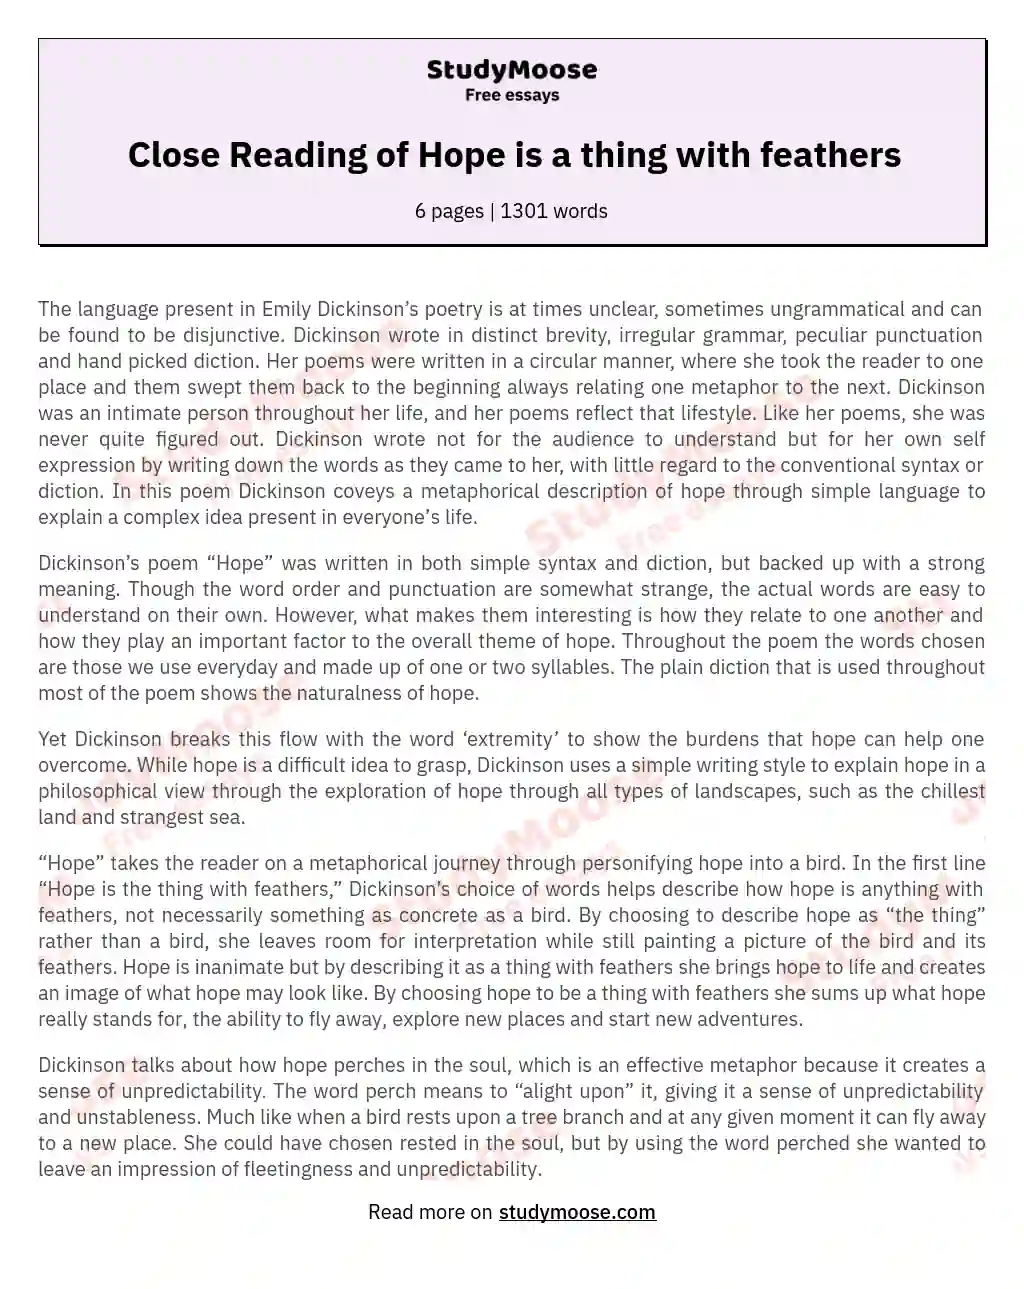 Close Reading of Hope is a thing with feathers essay